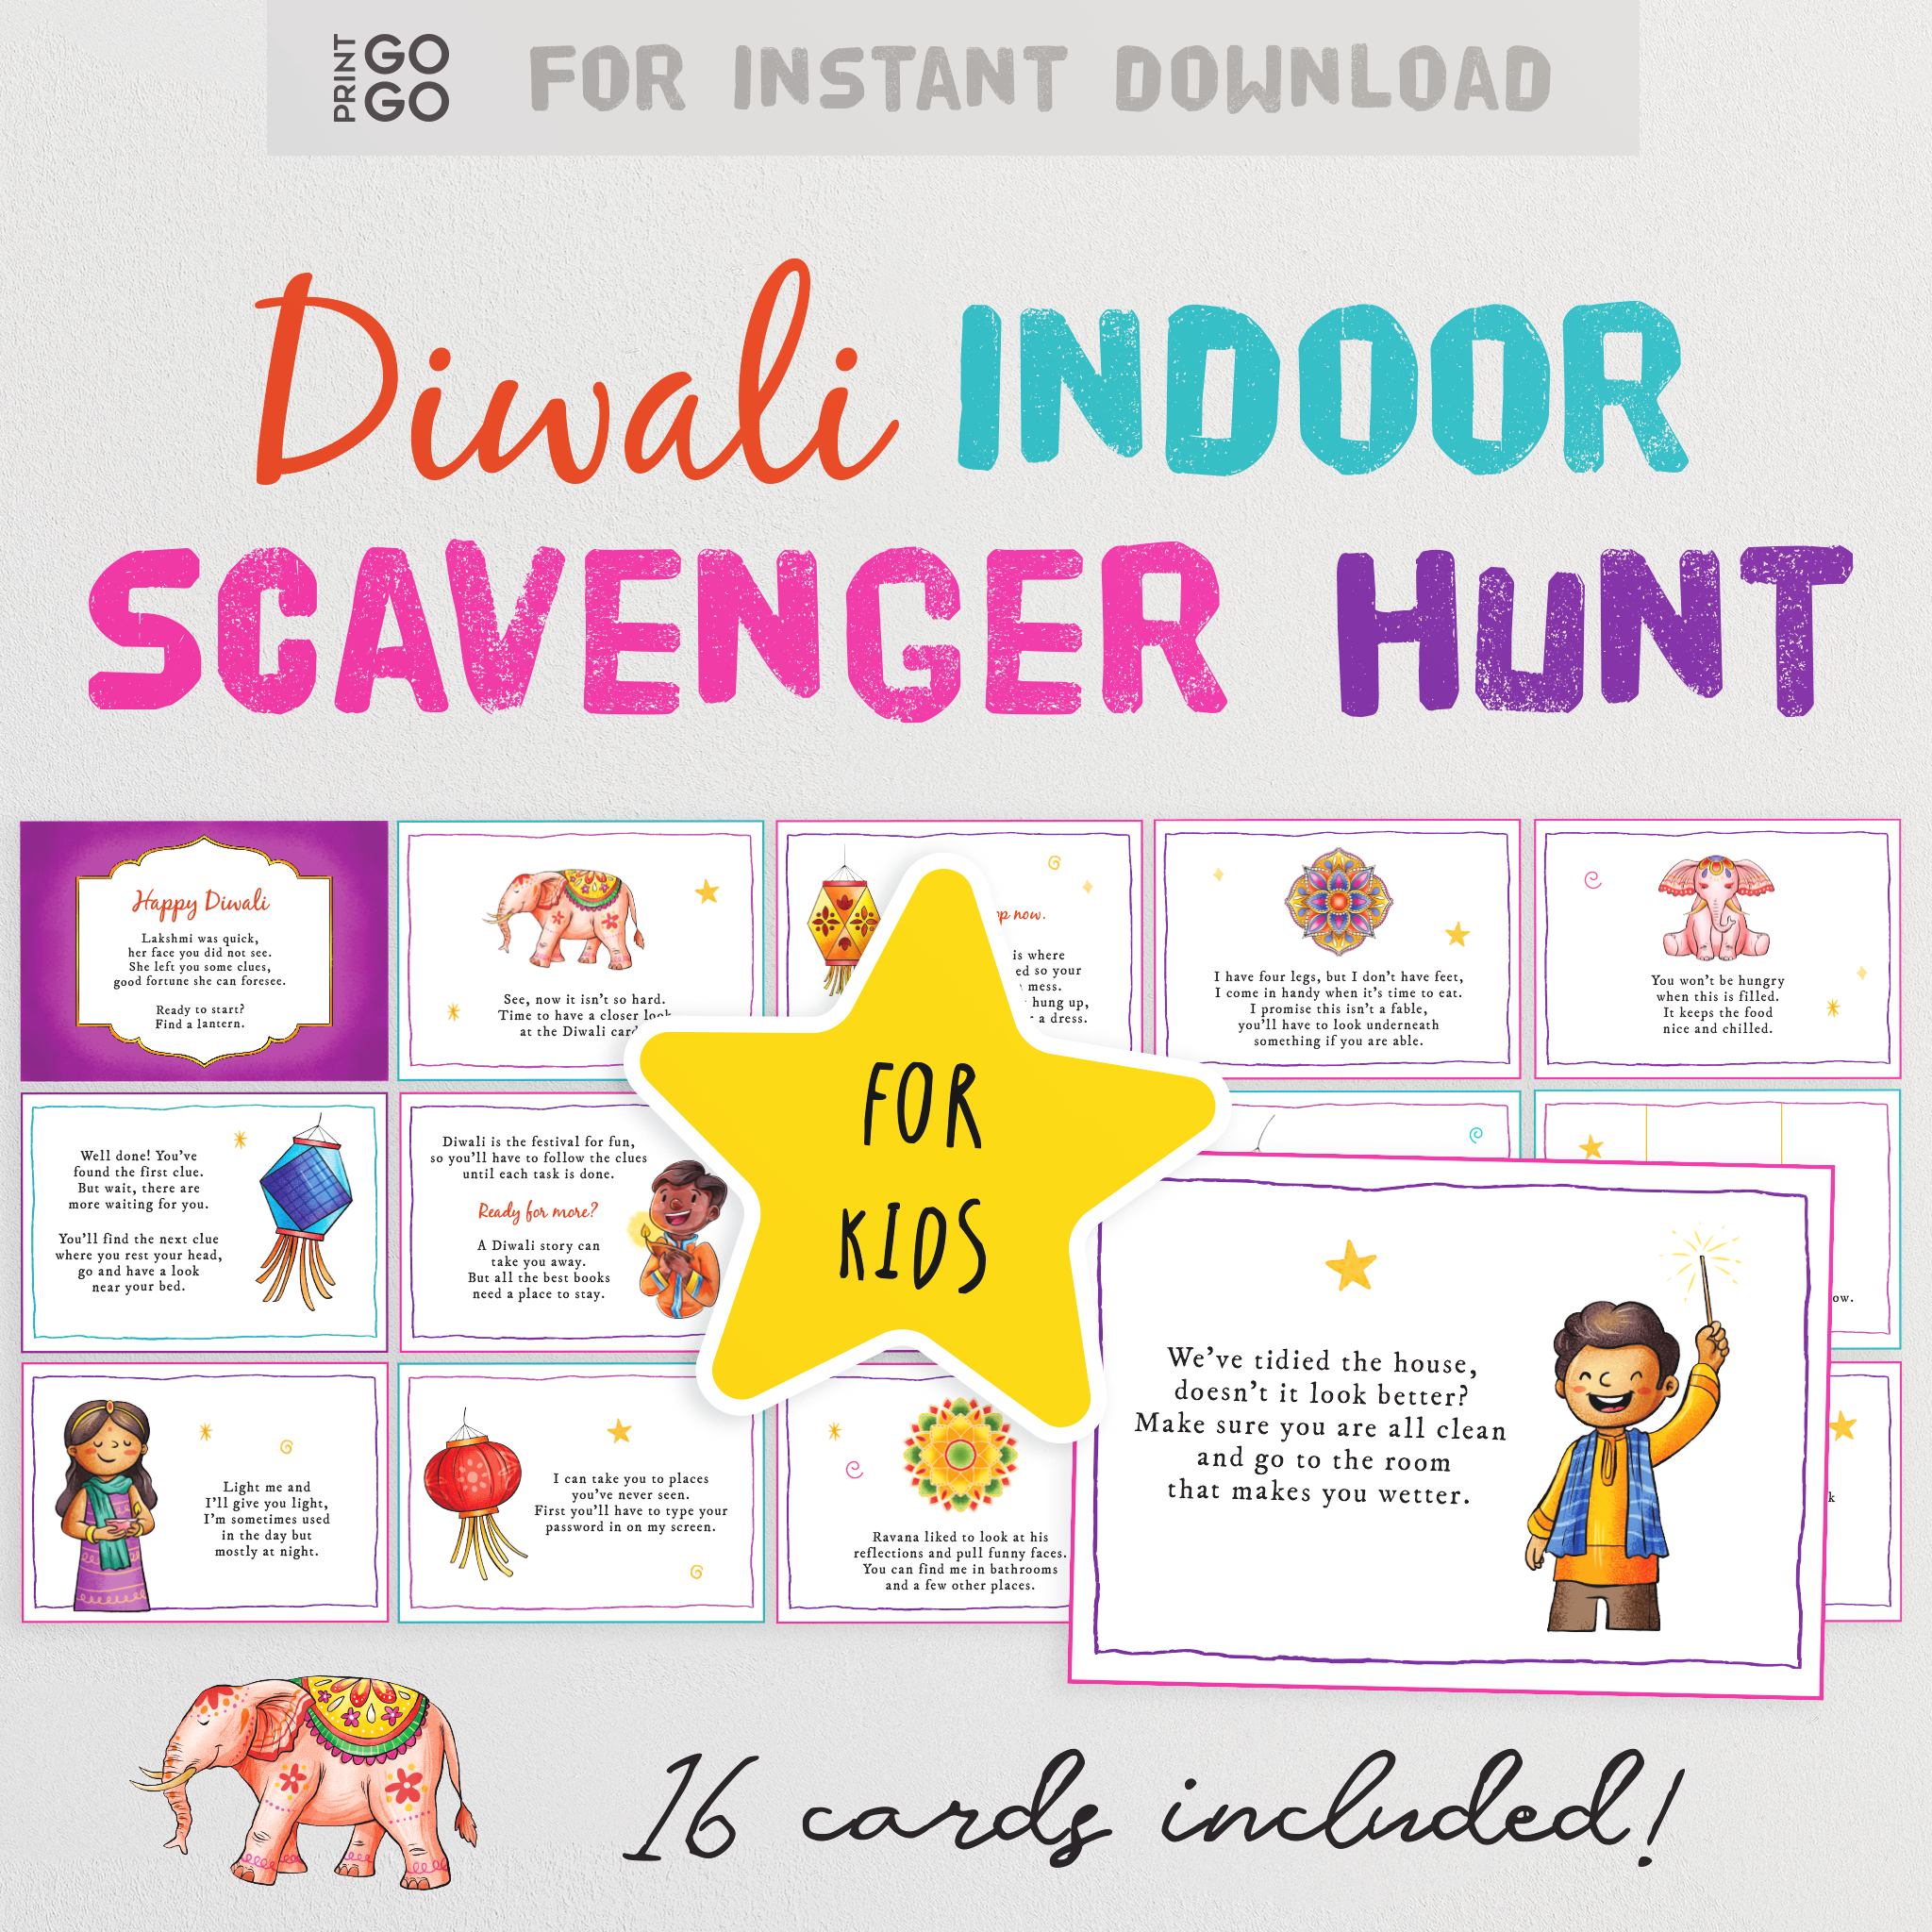 Diwali Scavenger Hunt for Kids - Celebrate the Festival of Light with a Fun Race Around The House In Search of a Surprise! Price: £4.80 Original Price:£6.00 VAT Included Diwali Scavenger Hunt for Kids - Celebrate the Festival of Light with a Fun Race Around The House In Search of a Surprise!